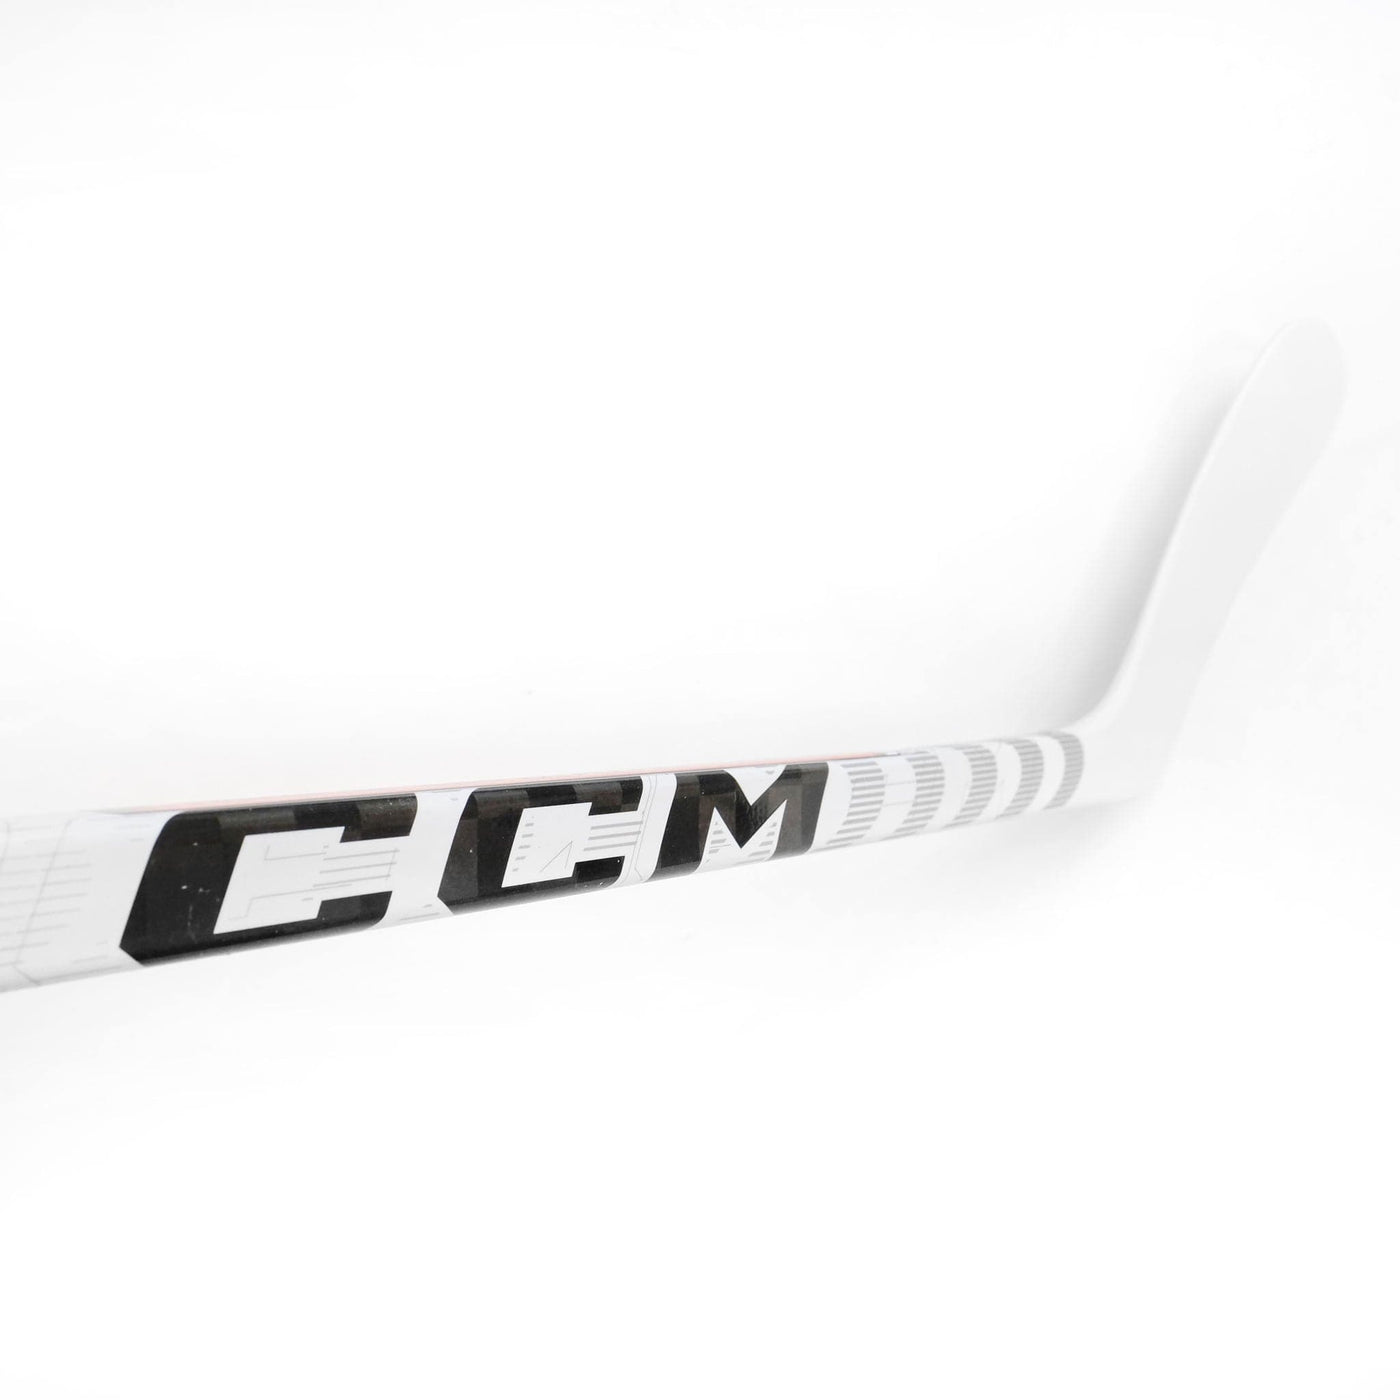 CCM Jetspeed FT5 Pro Intermediate Hockey Stick - North Limited Edition - The Hockey Shop Source For Sports